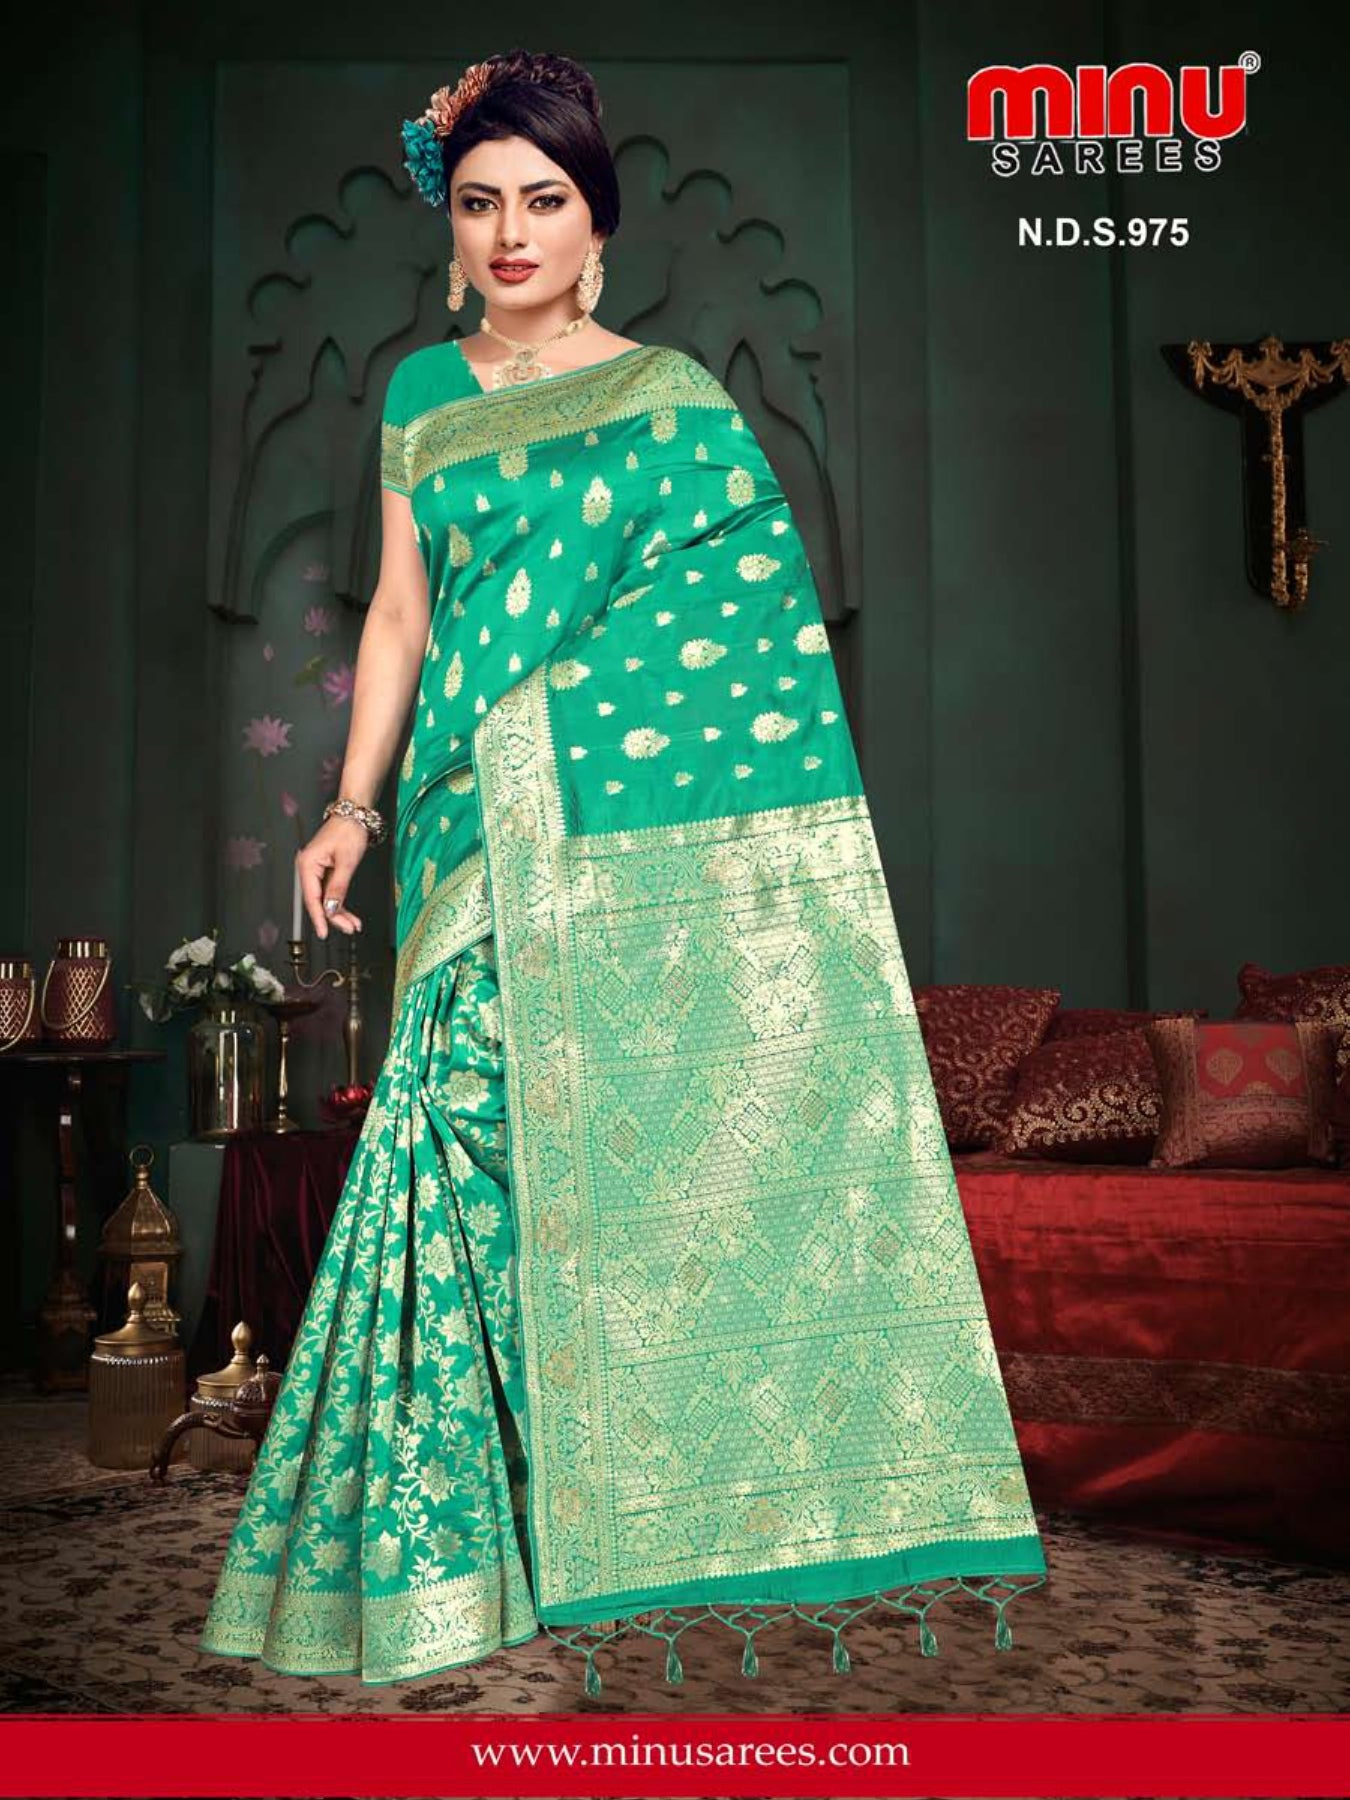 Woman standing in green color fancy saree for wholesale